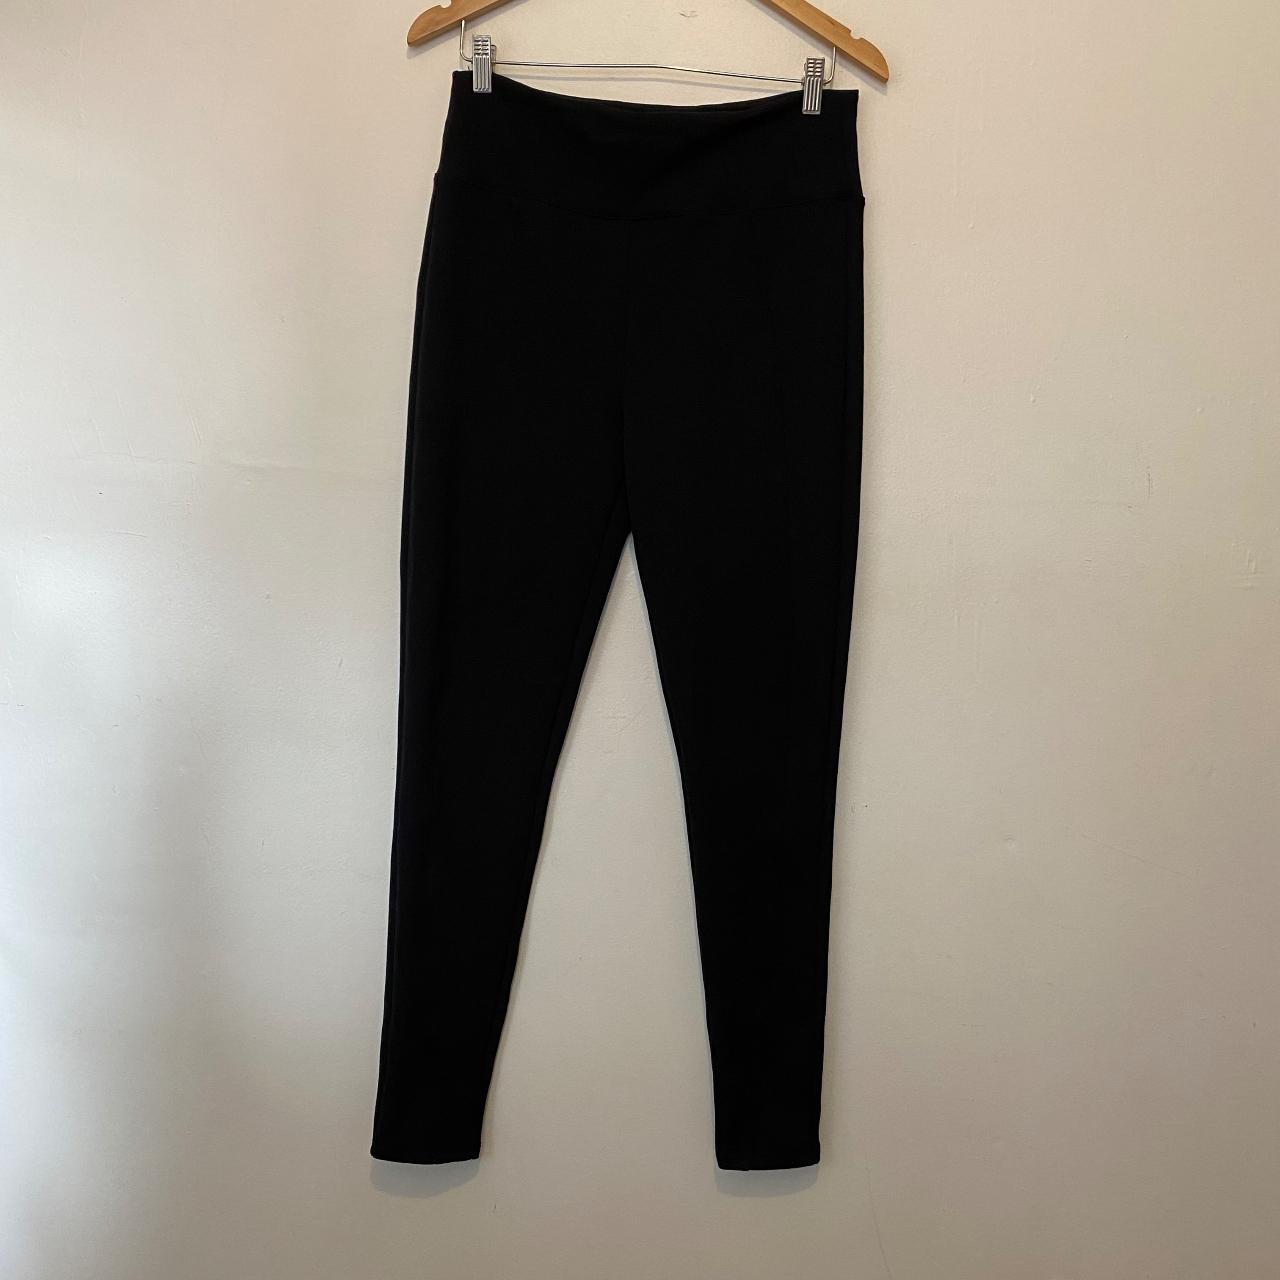 ASSETS by SPANX Women's Ponte Shaping Leggings Size - Depop